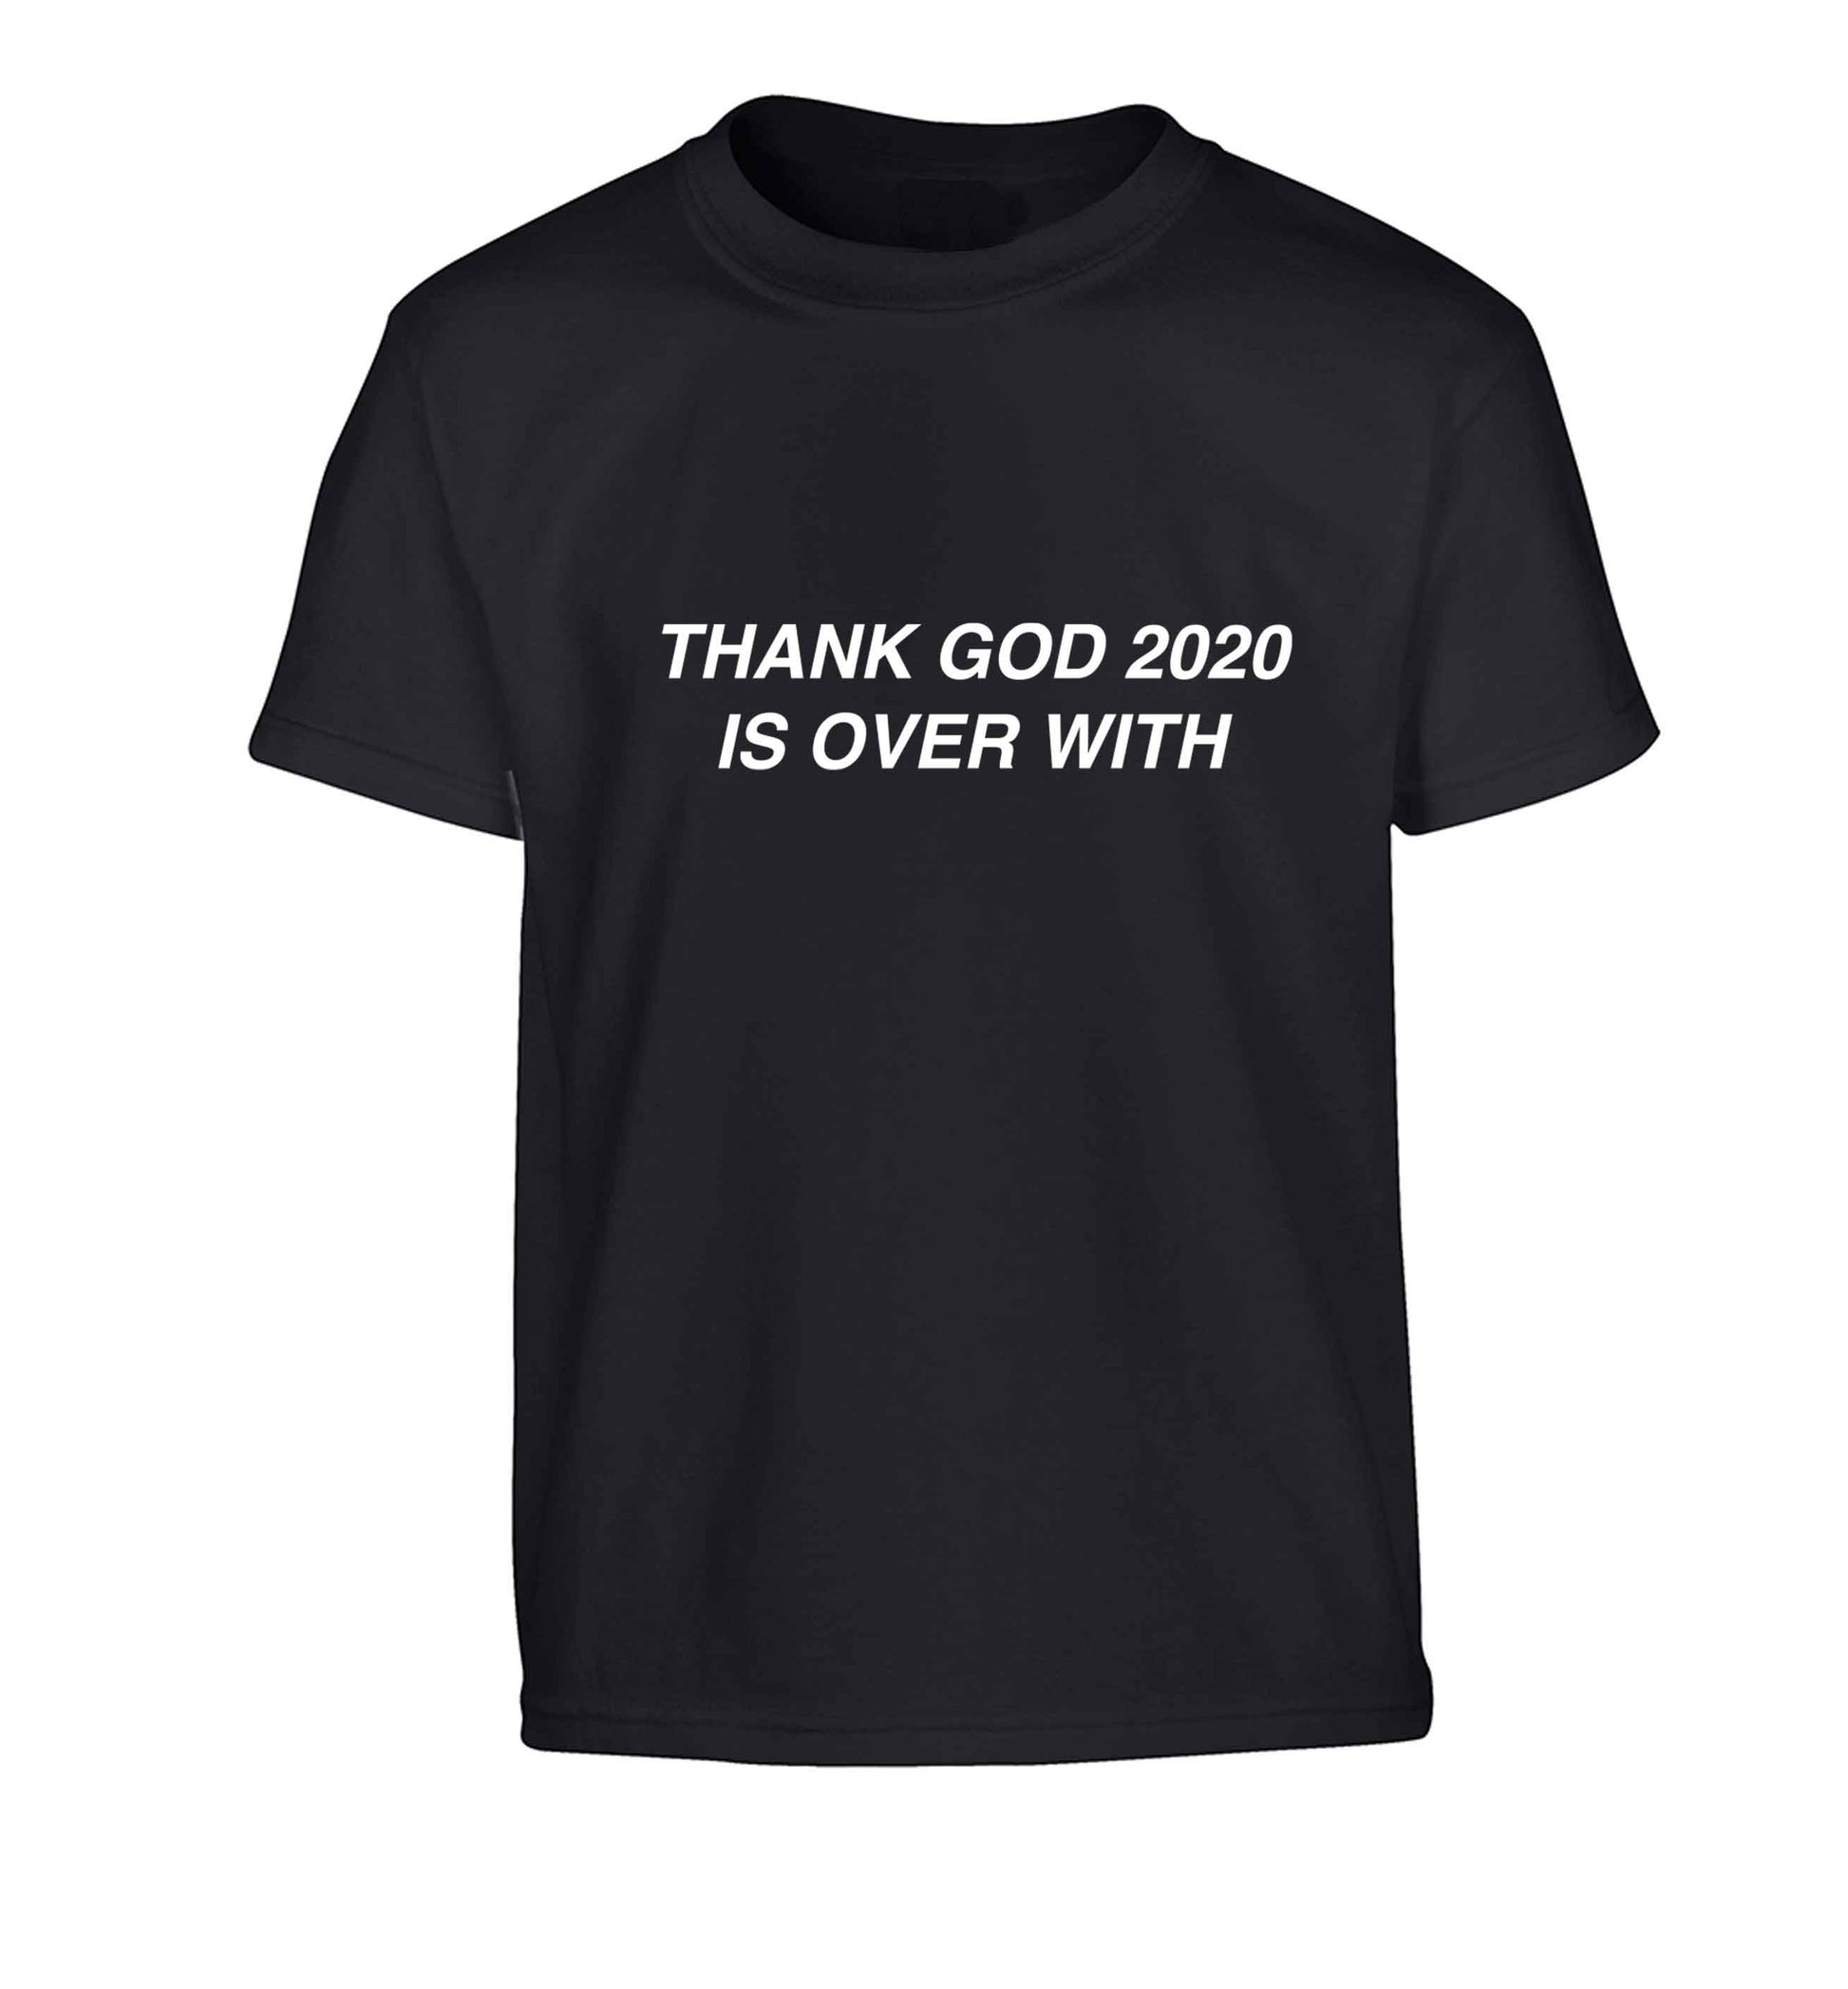 Thank god 2020 is over with Children's black Tshirt 12-13 Years